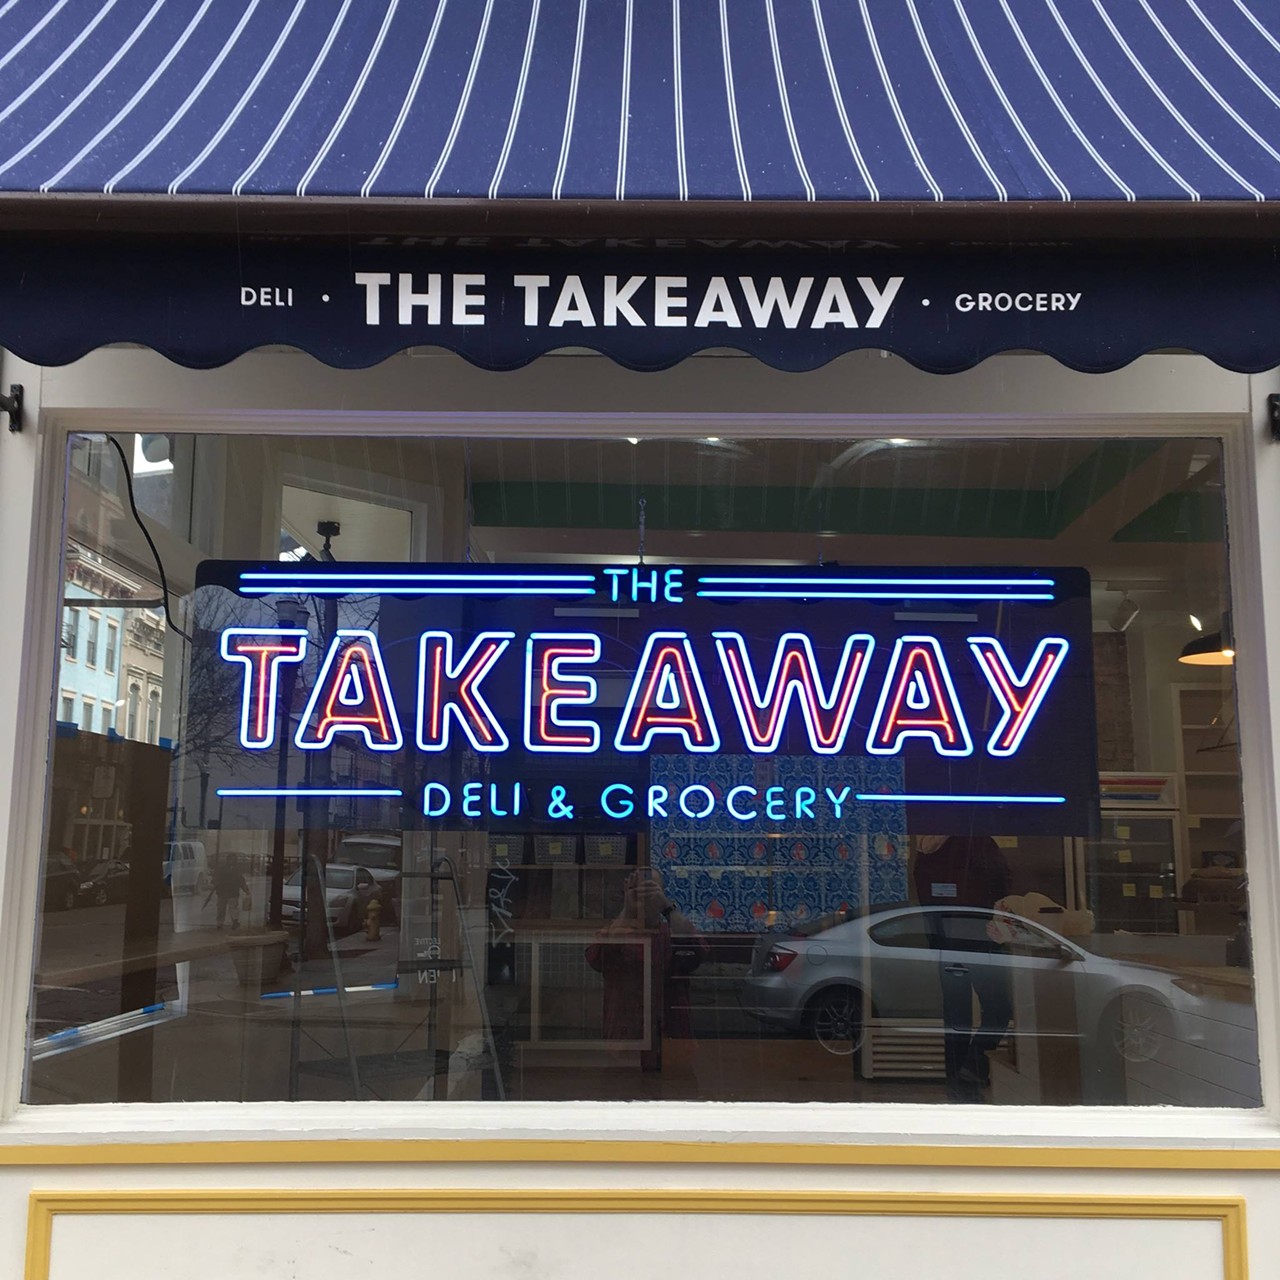 The Takeaway
Over-the-Rhine deli, grocery and sandwich shop closed its doors on May 27. The Takeaway announced the closure of the 1324 Main Street location on Facebook. Although the closure is sad, it seems like something new is coming Cincinnatians' way: “We’re closing down to reimagine and start dreaming again of what this little corner of Main Street can be,” read the post.